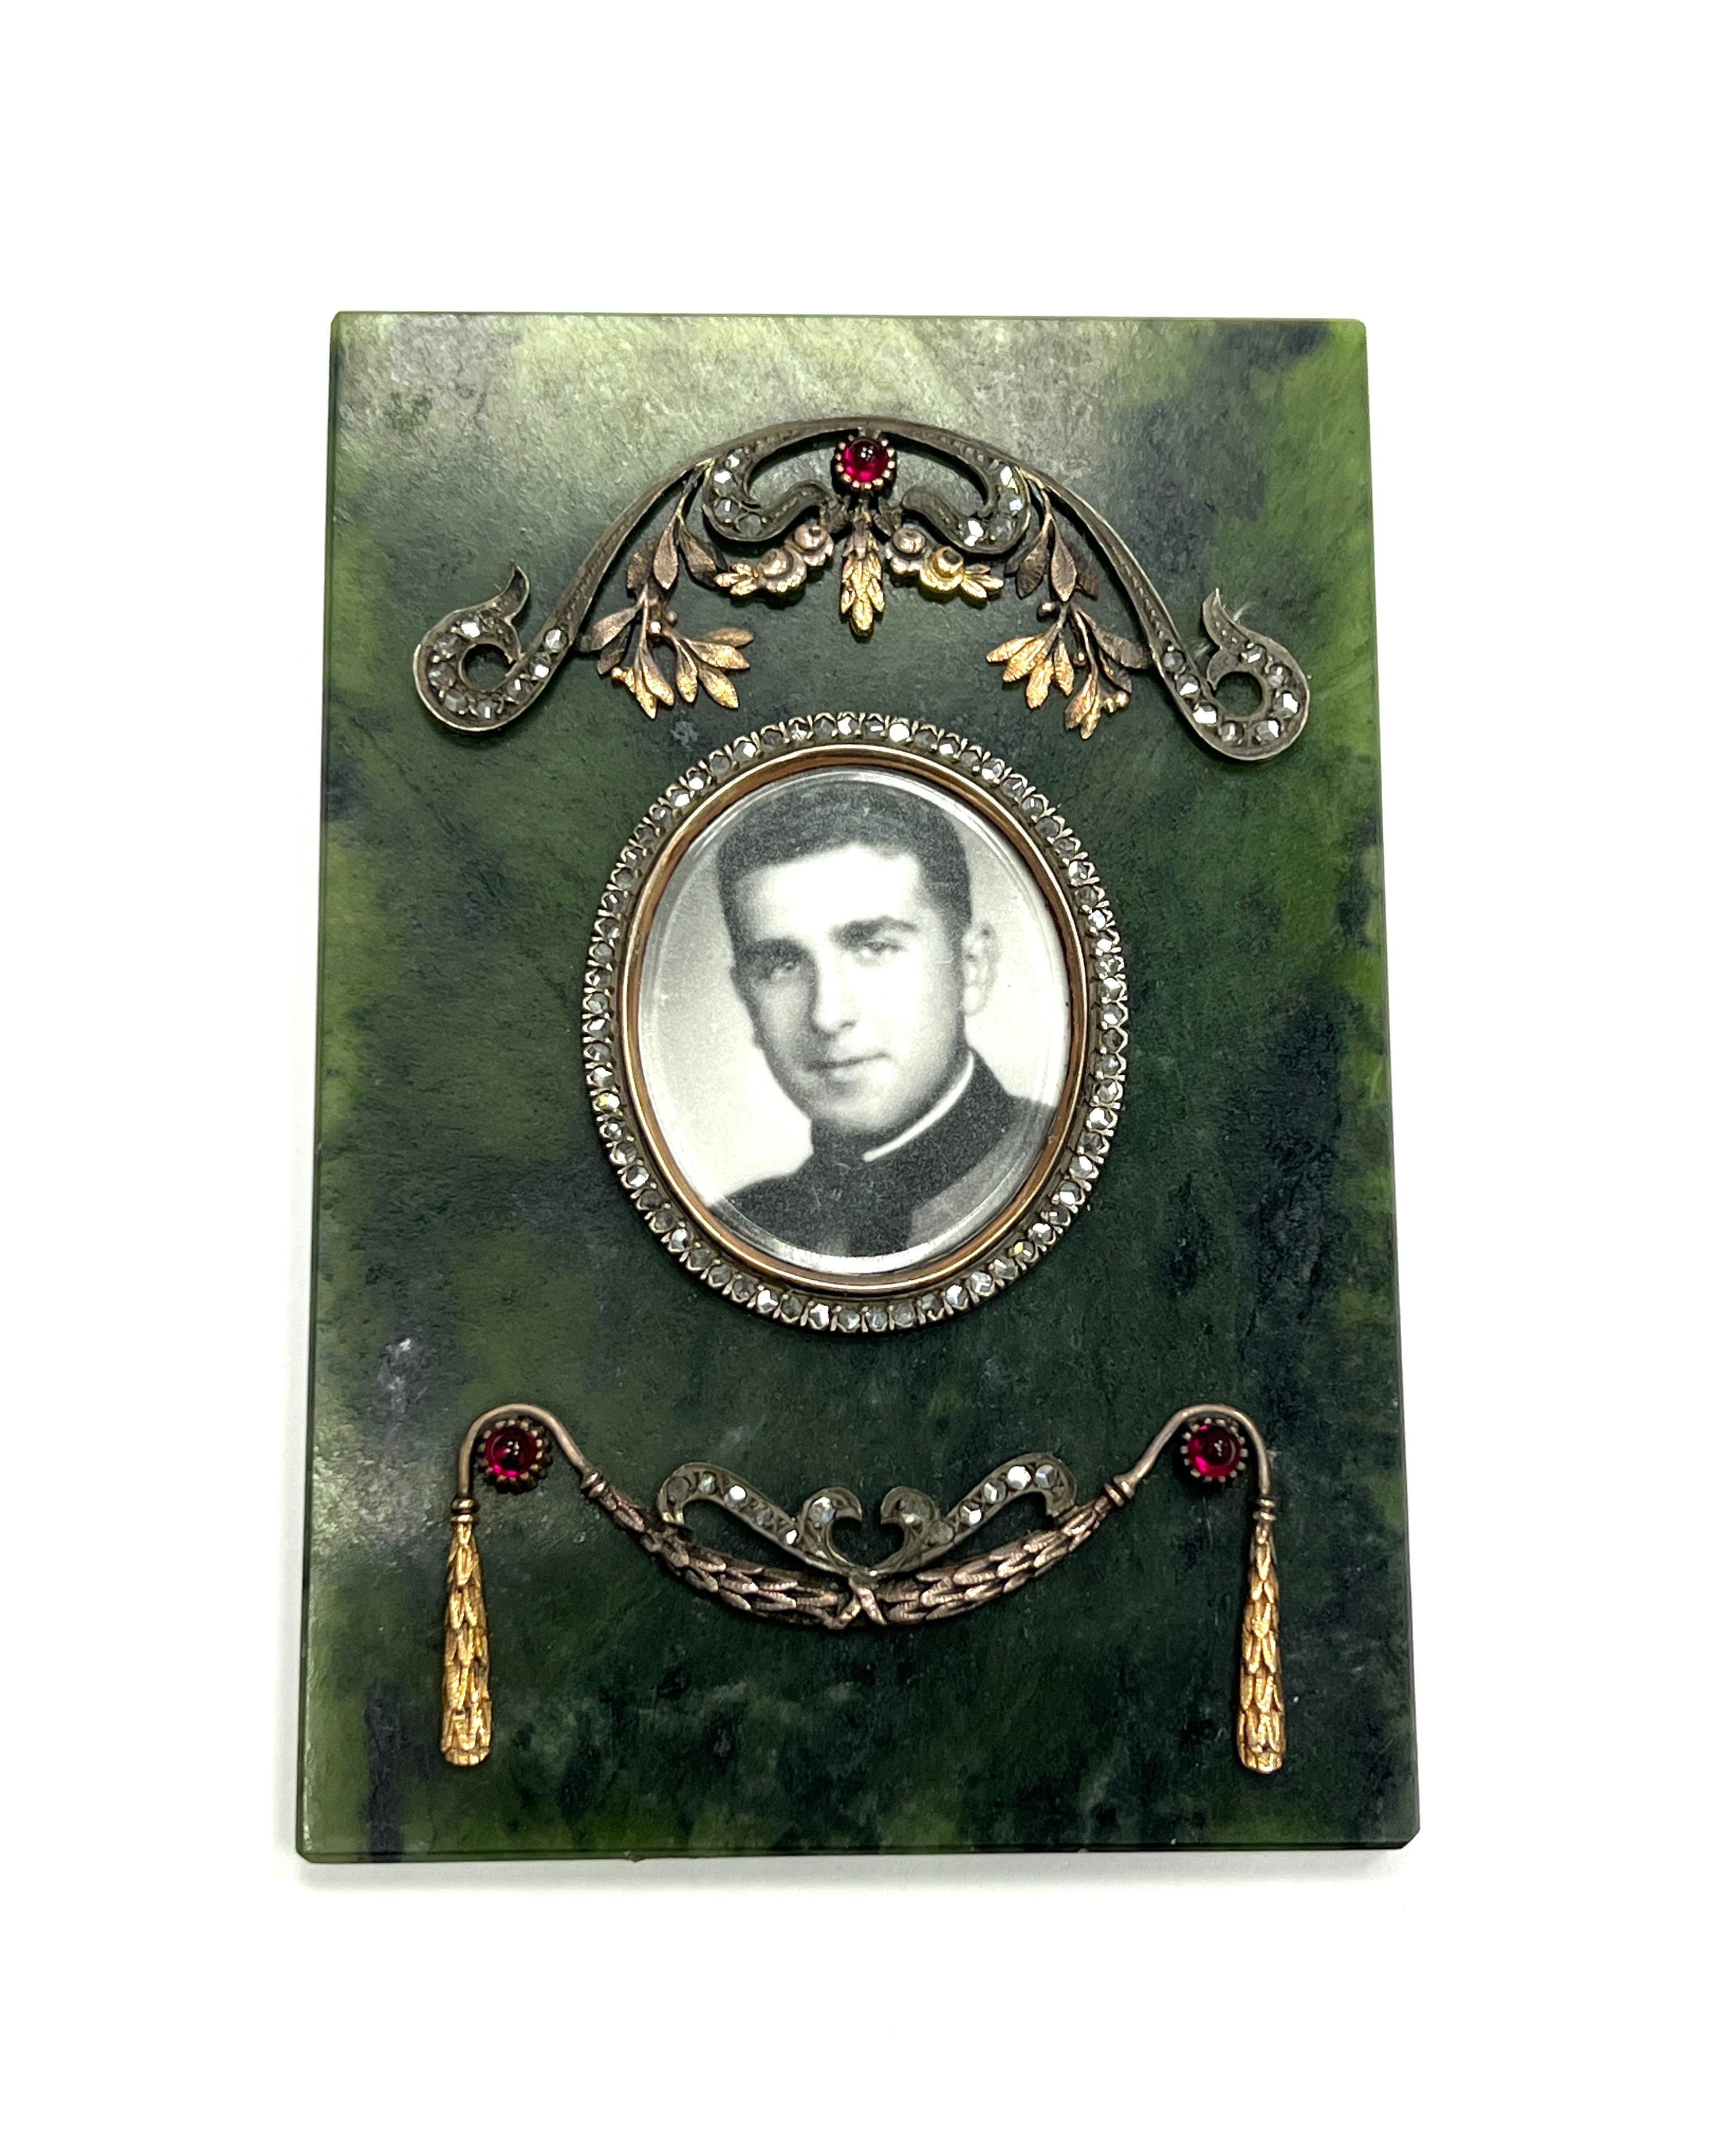 Russian Nephrite Silver and Gold Diamond Picture Frame

Nephrite frame with rose-cut diamonds and cabochon rubies; nephrite thickness 2.5 mm, oval frame dimensions 27 x 32 mm

Size: width 2.63 inches; length 3.88 inches
Total weight: 70.5 grams 